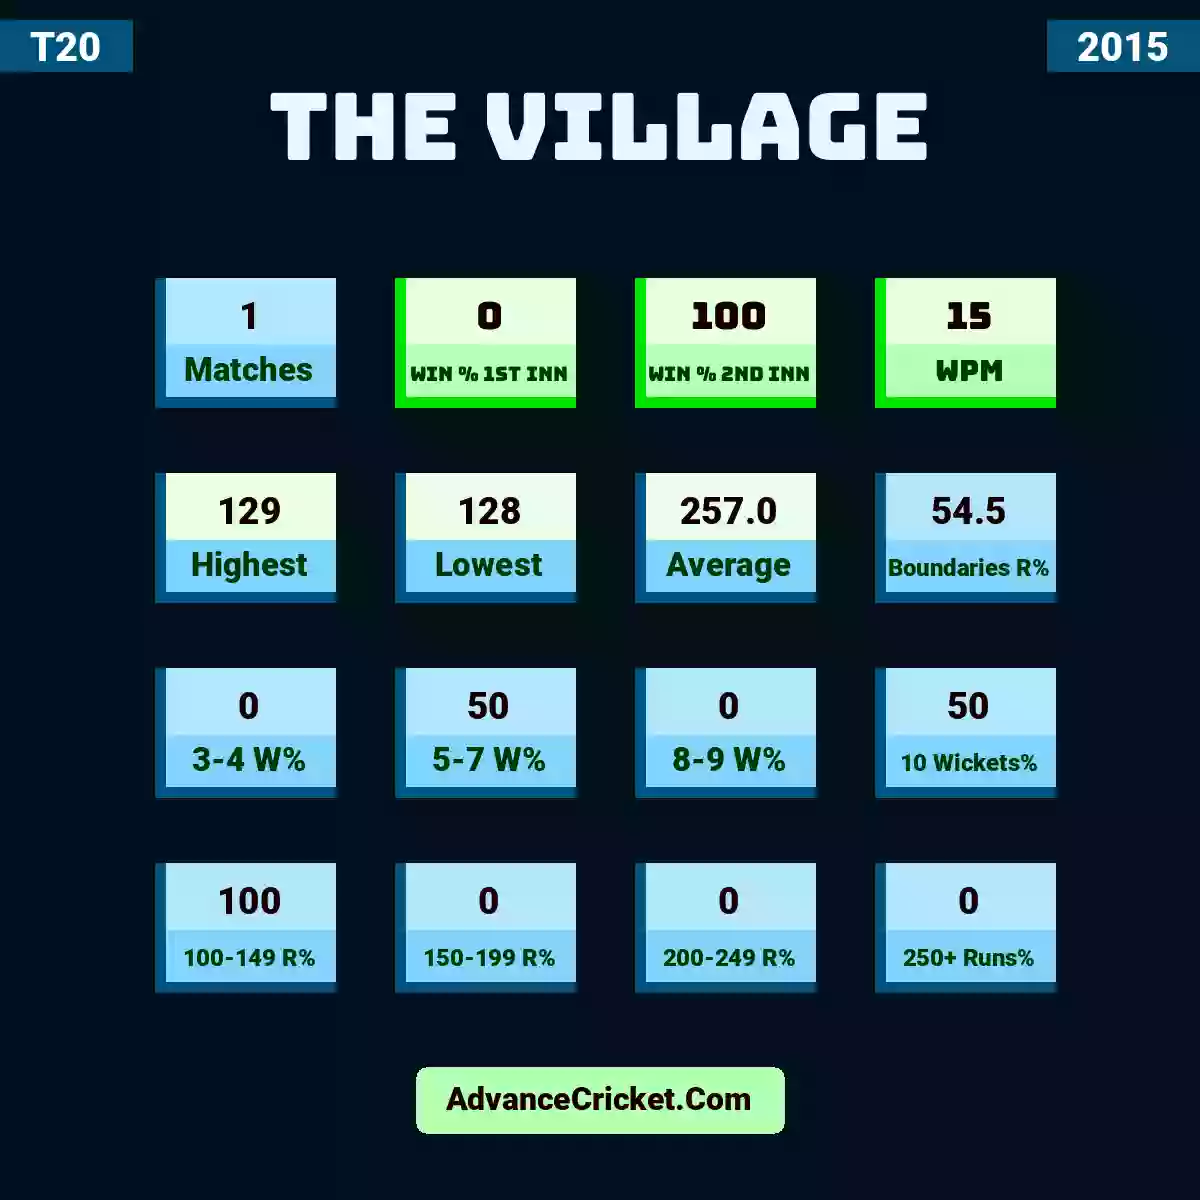 Image showing The Village with Matches: 1, Win % 1st Inn: 0, Win % 2nd Inn: 100, WPM: 15, Highest: 129, Lowest: 128, Average: 257.0, Boundaries R%: 54.5, 3-4 W%: 0, 5-7 W%: 50, 8-9 W%: 0, 10 Wickets%: 50, 100-149 R%: 100, 150-199 R%: 0, 200-249 R%: 0, 250+ Runs%: 0.